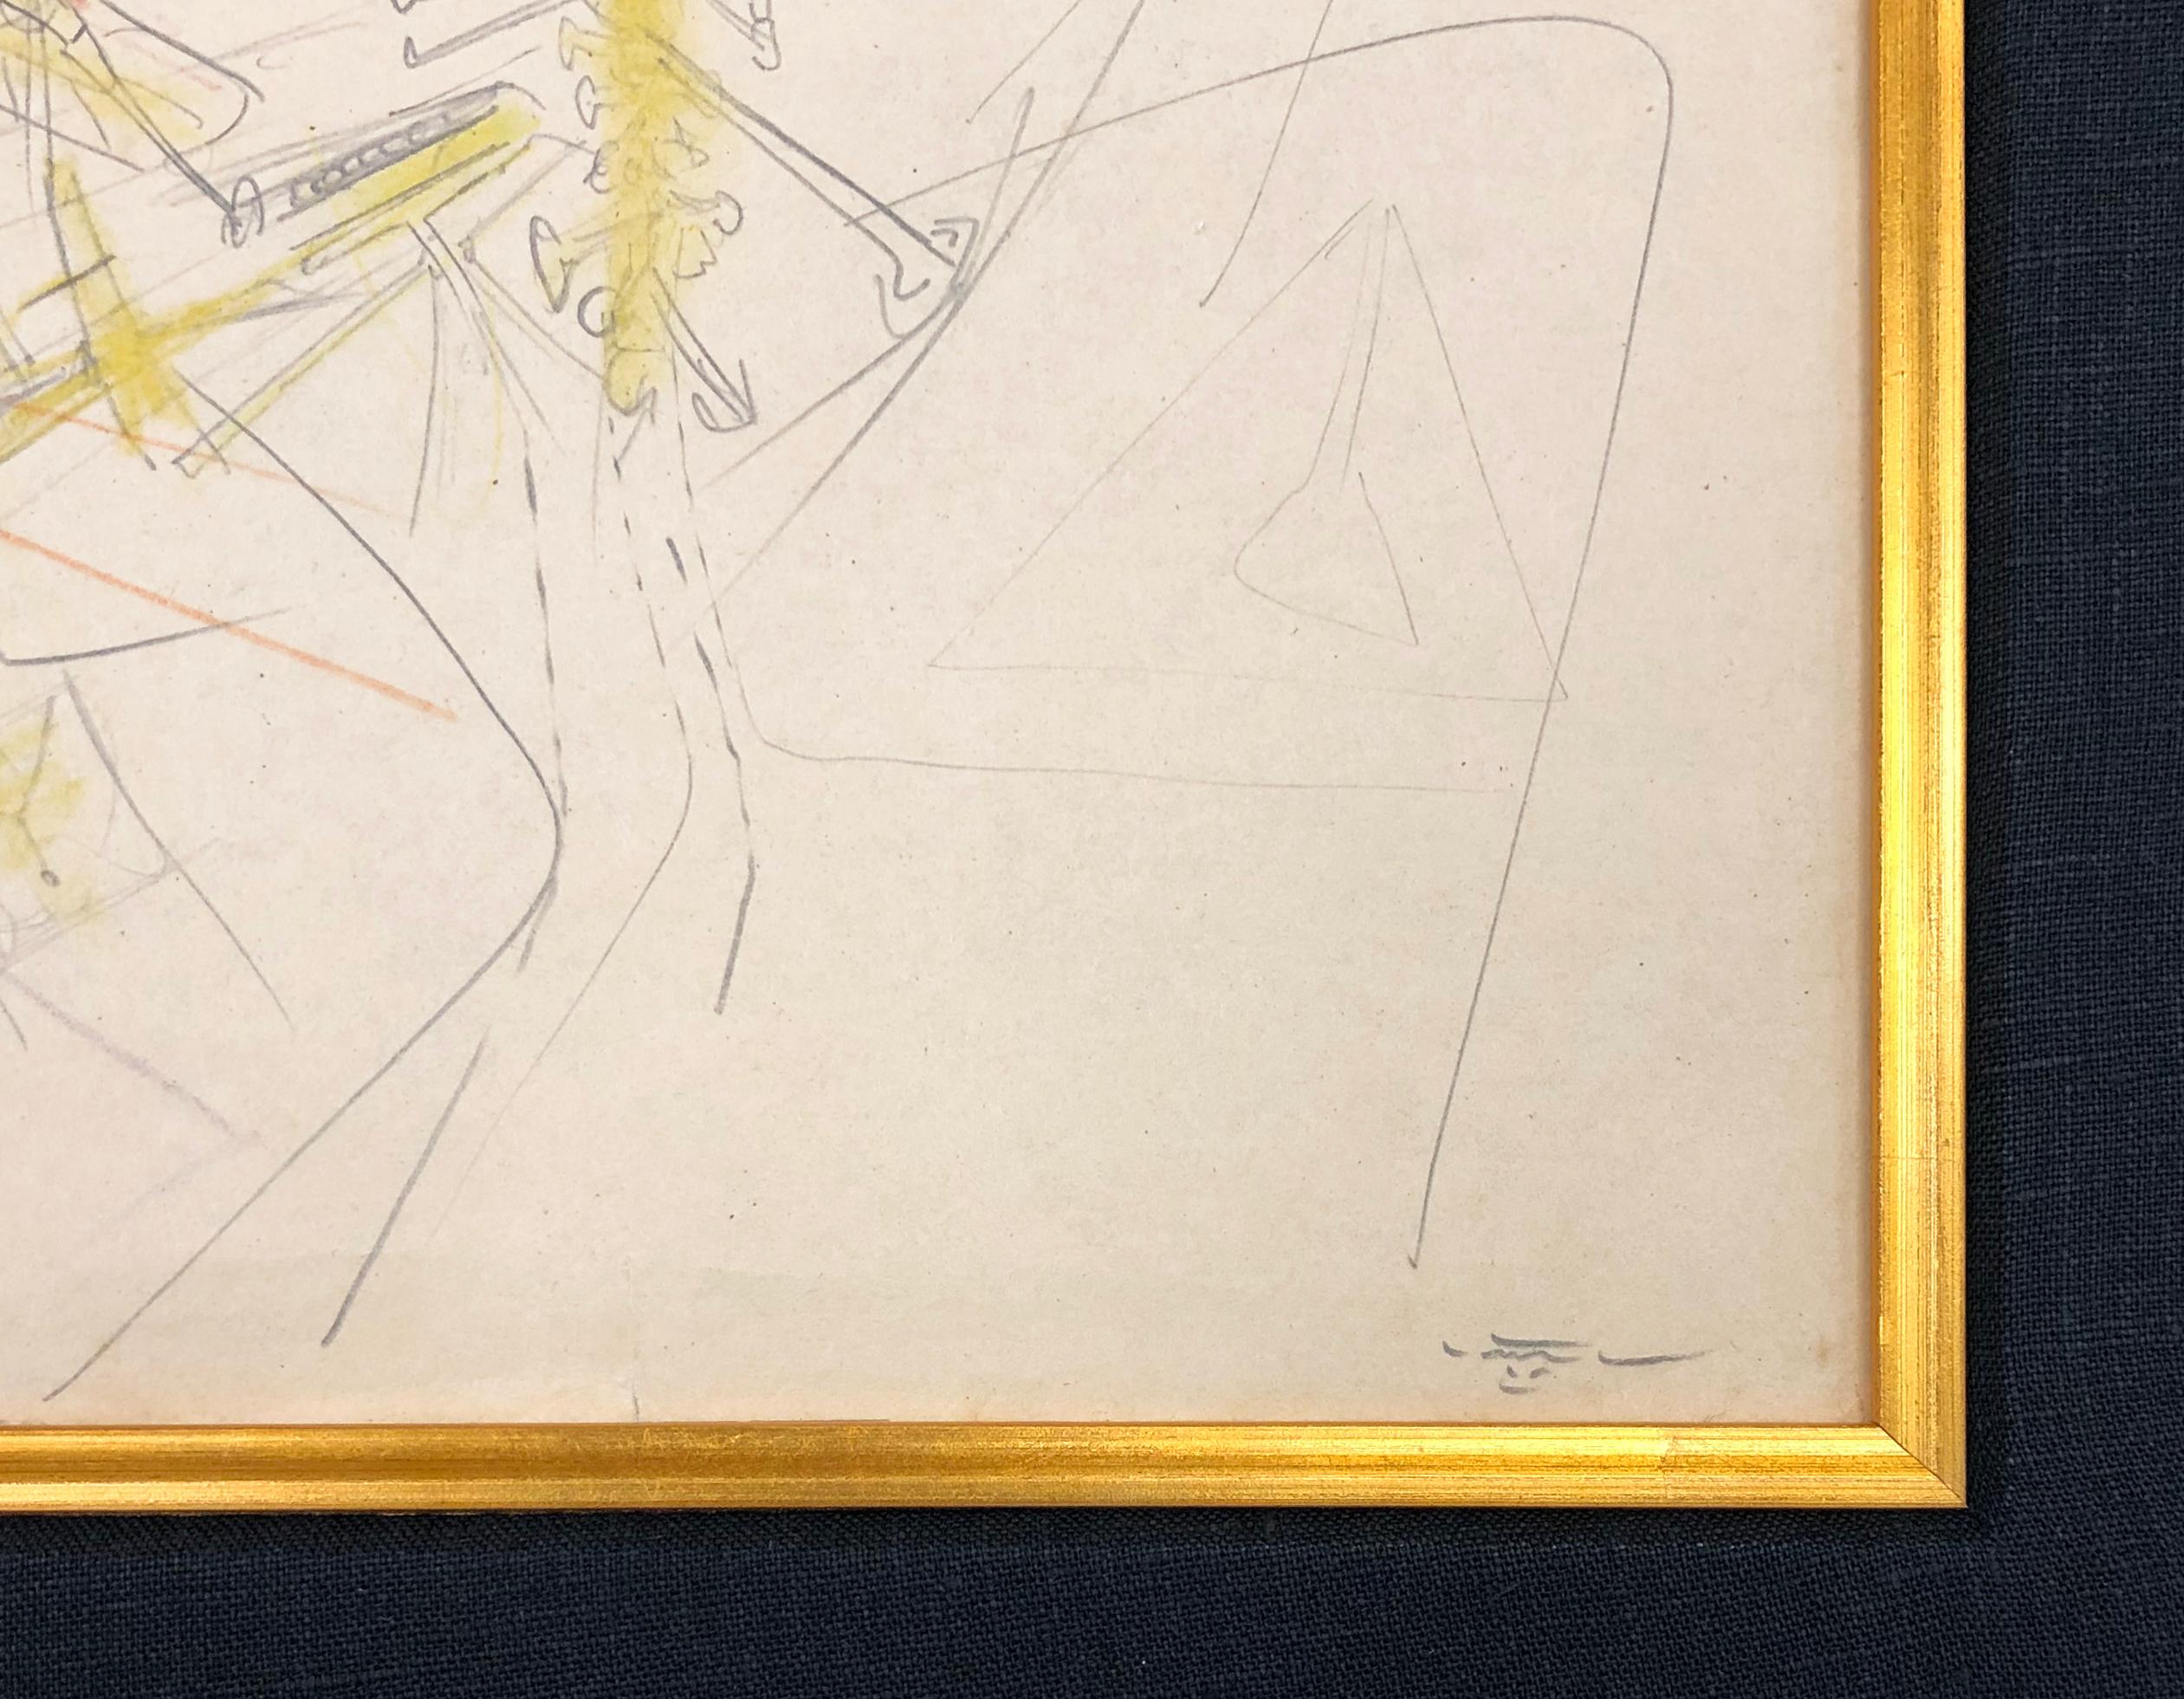 Original color drawing on paper.  Hand signed lower front by Roberto Matta.  Image size 12 x 16 inches.   Frame size approx 23.25 x 27.5 inches.  

Artwork is in overall excellent condition. Some as expected signs of aging in the paper.  Frame has